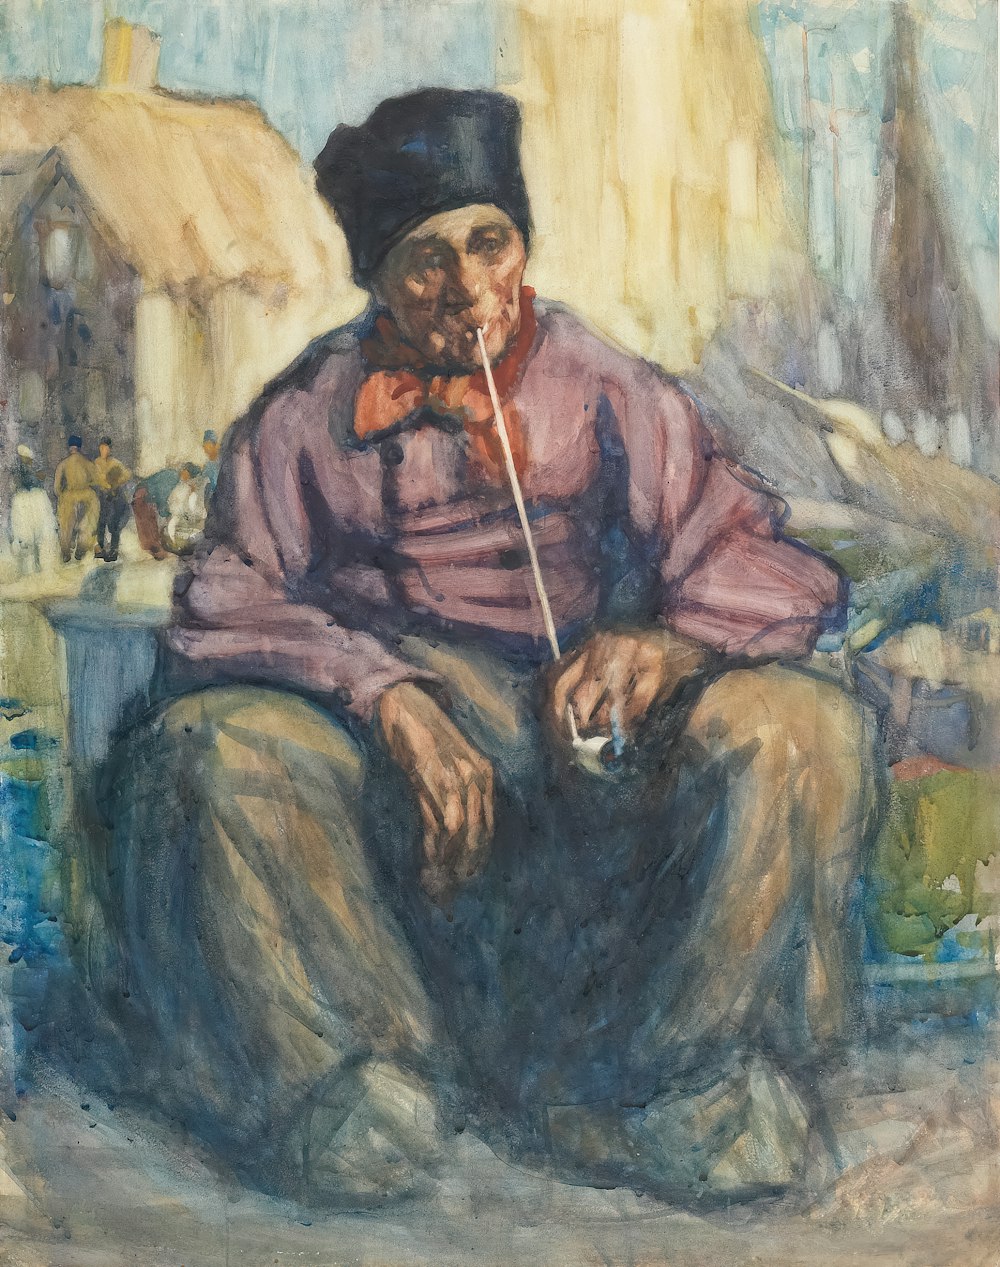 a painting of a man smoking a cigarette